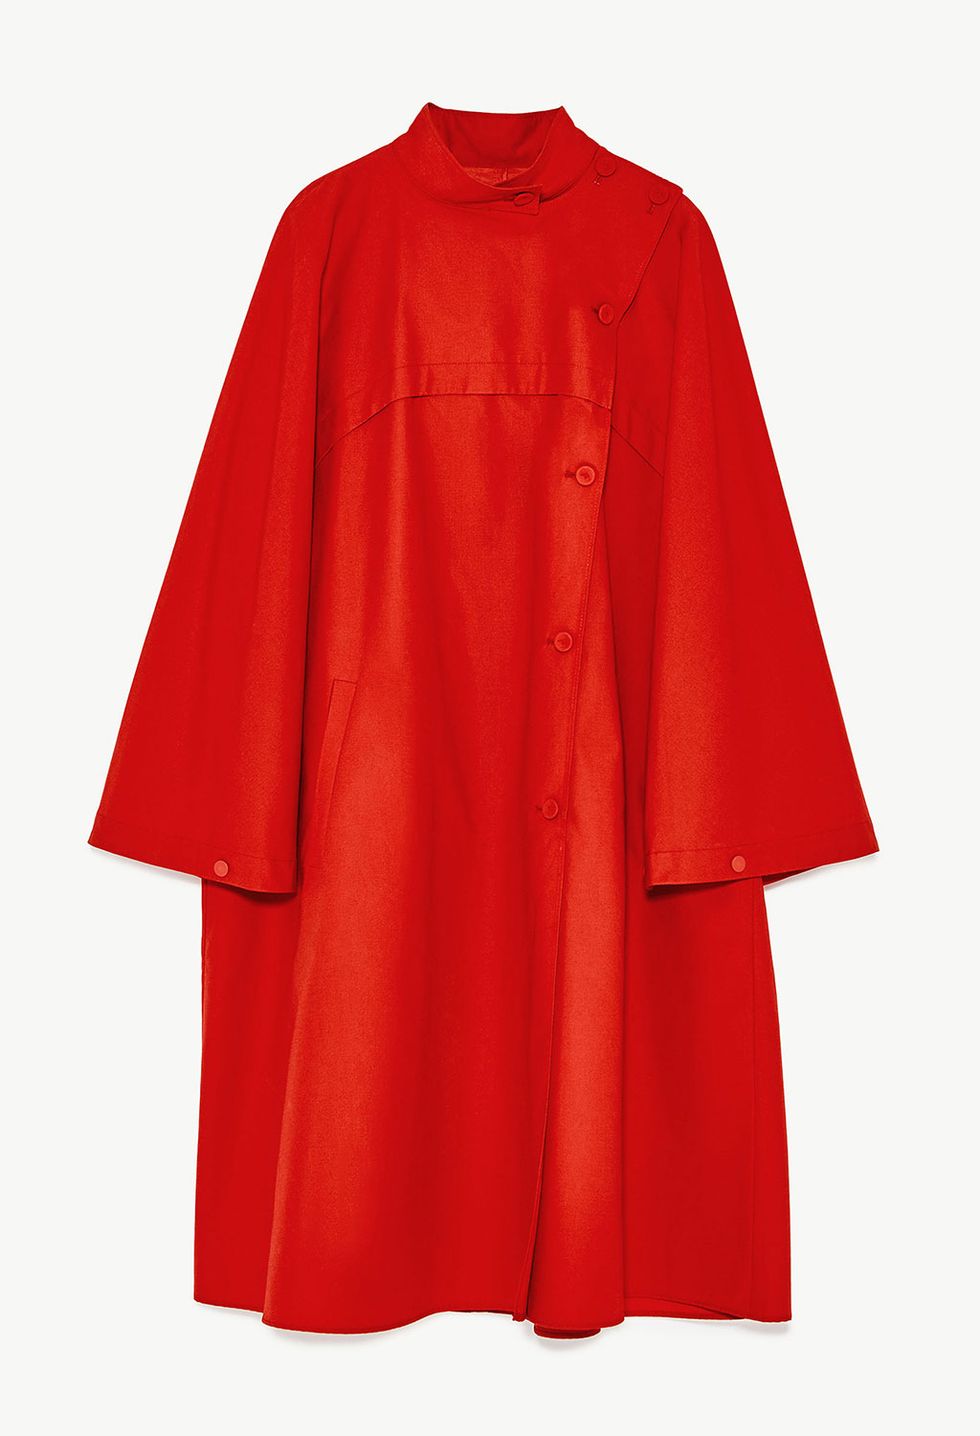 Clothing, Outerwear, Red, Sleeve, Costume, Cape, Robe, Academic dress, 